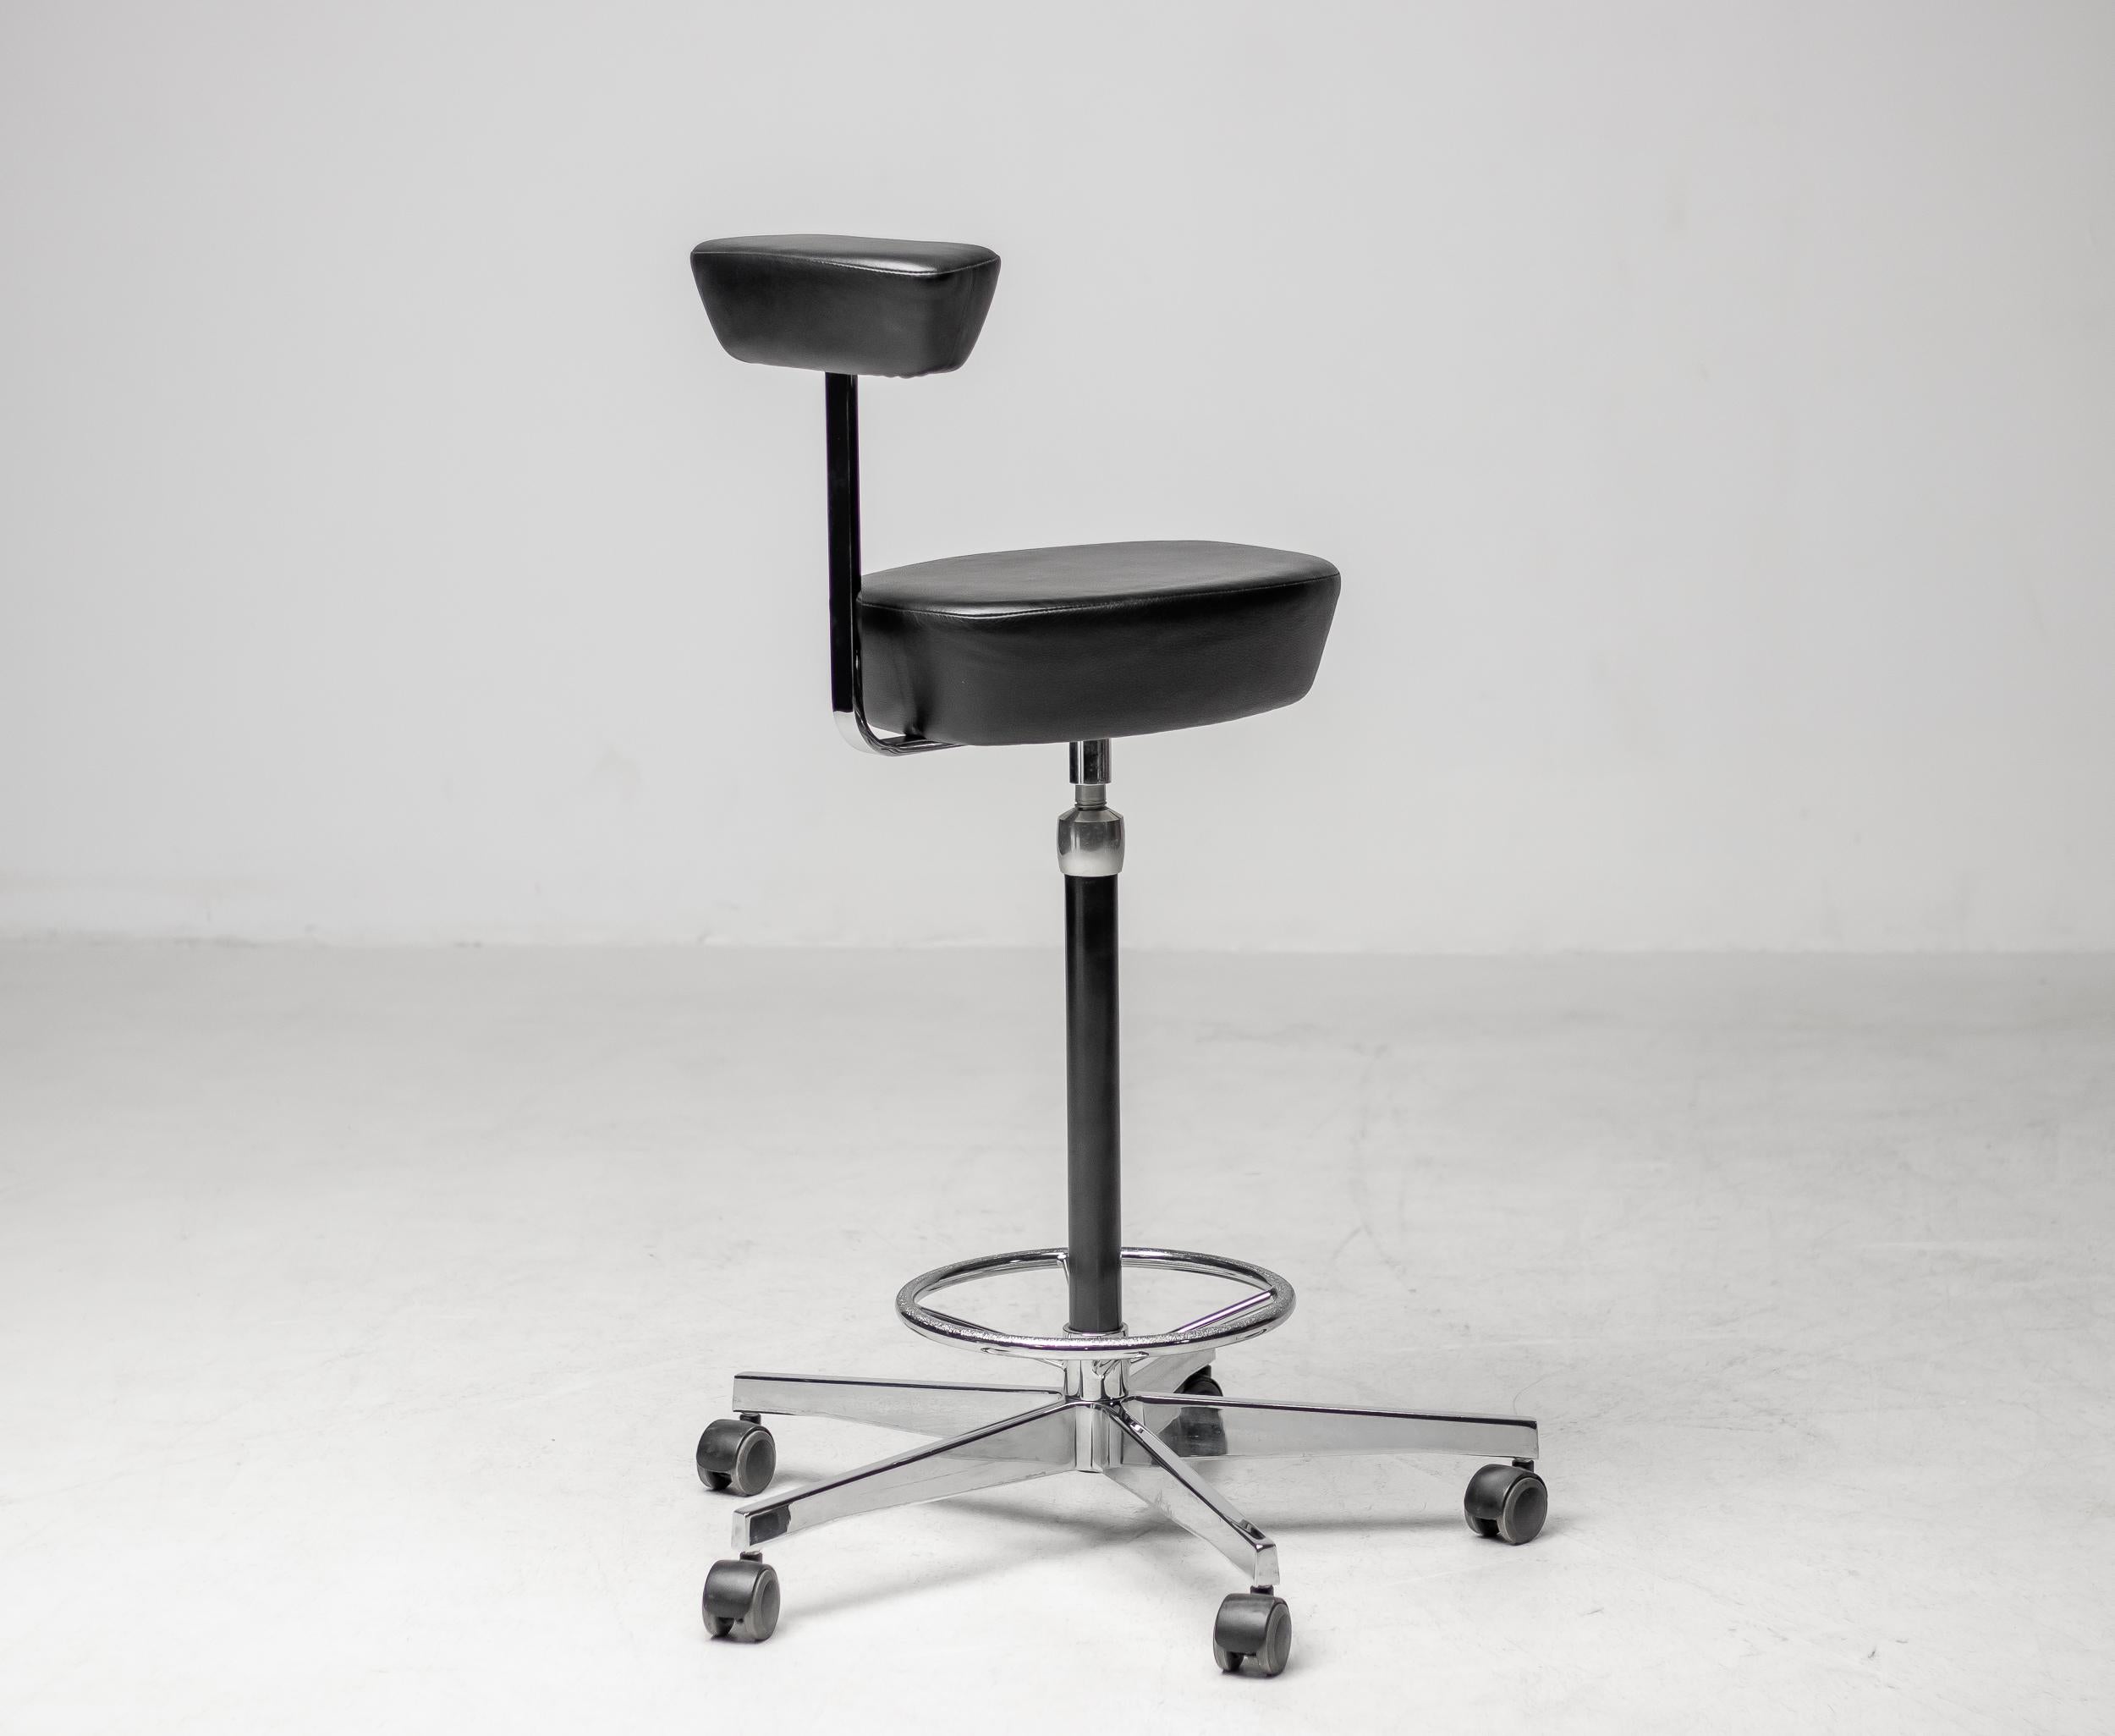 Perch stool, drafting chair designed by George Nelson and Robert Propst.
Black leather, chrome base. Vitra edition.
Provenance; the German Bank for Doctors and Pharmacists.
Priced individually, 4 available.